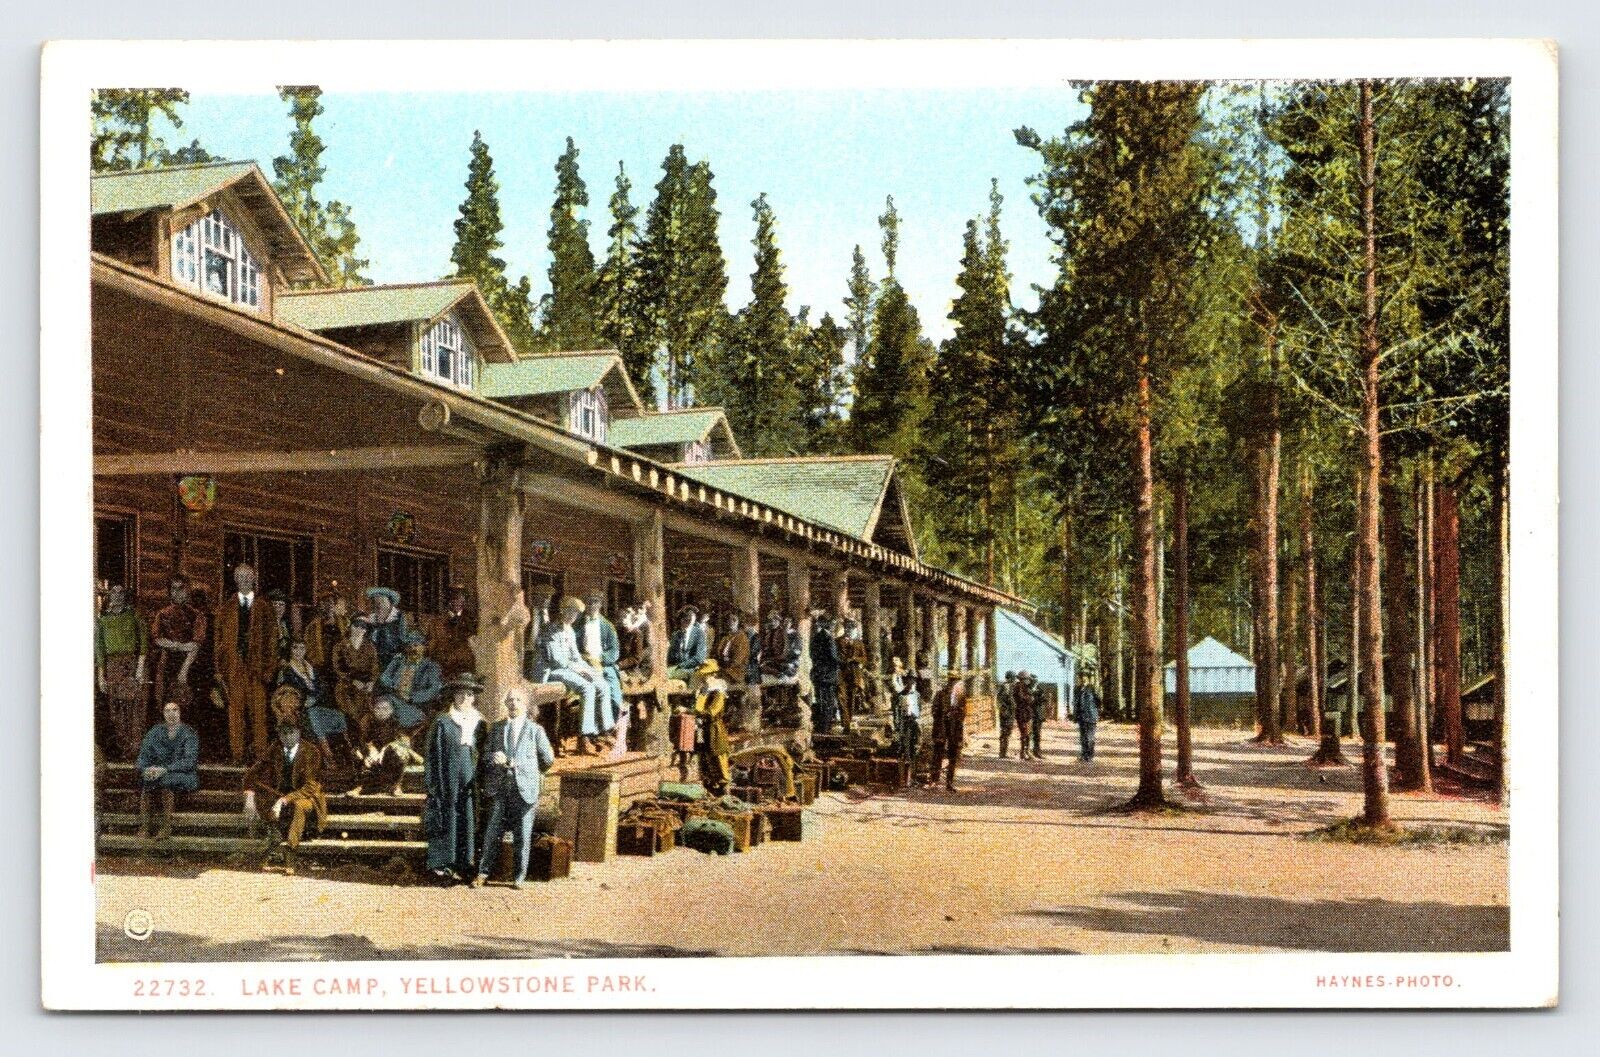 Lake Camp Yellowstone Park, Lodge and People, Antique Haynes Postcard